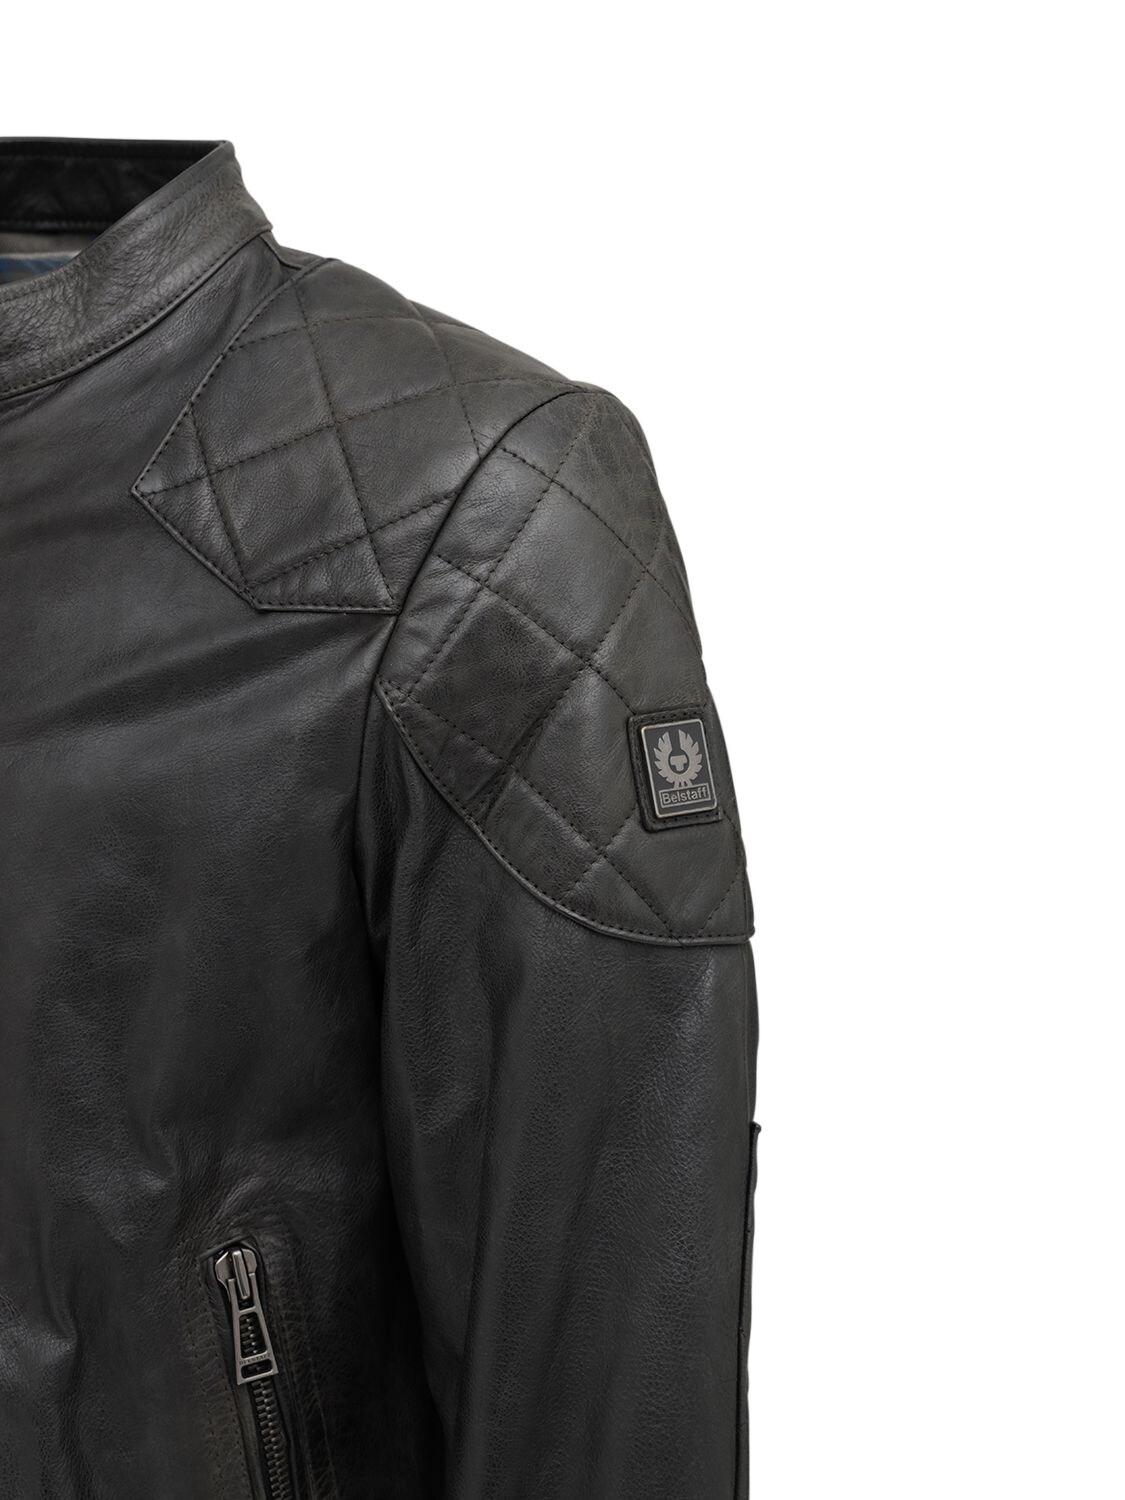 Belstaff Outlaw Hand Waxed Leather Jacket in Black for Men - Lyst